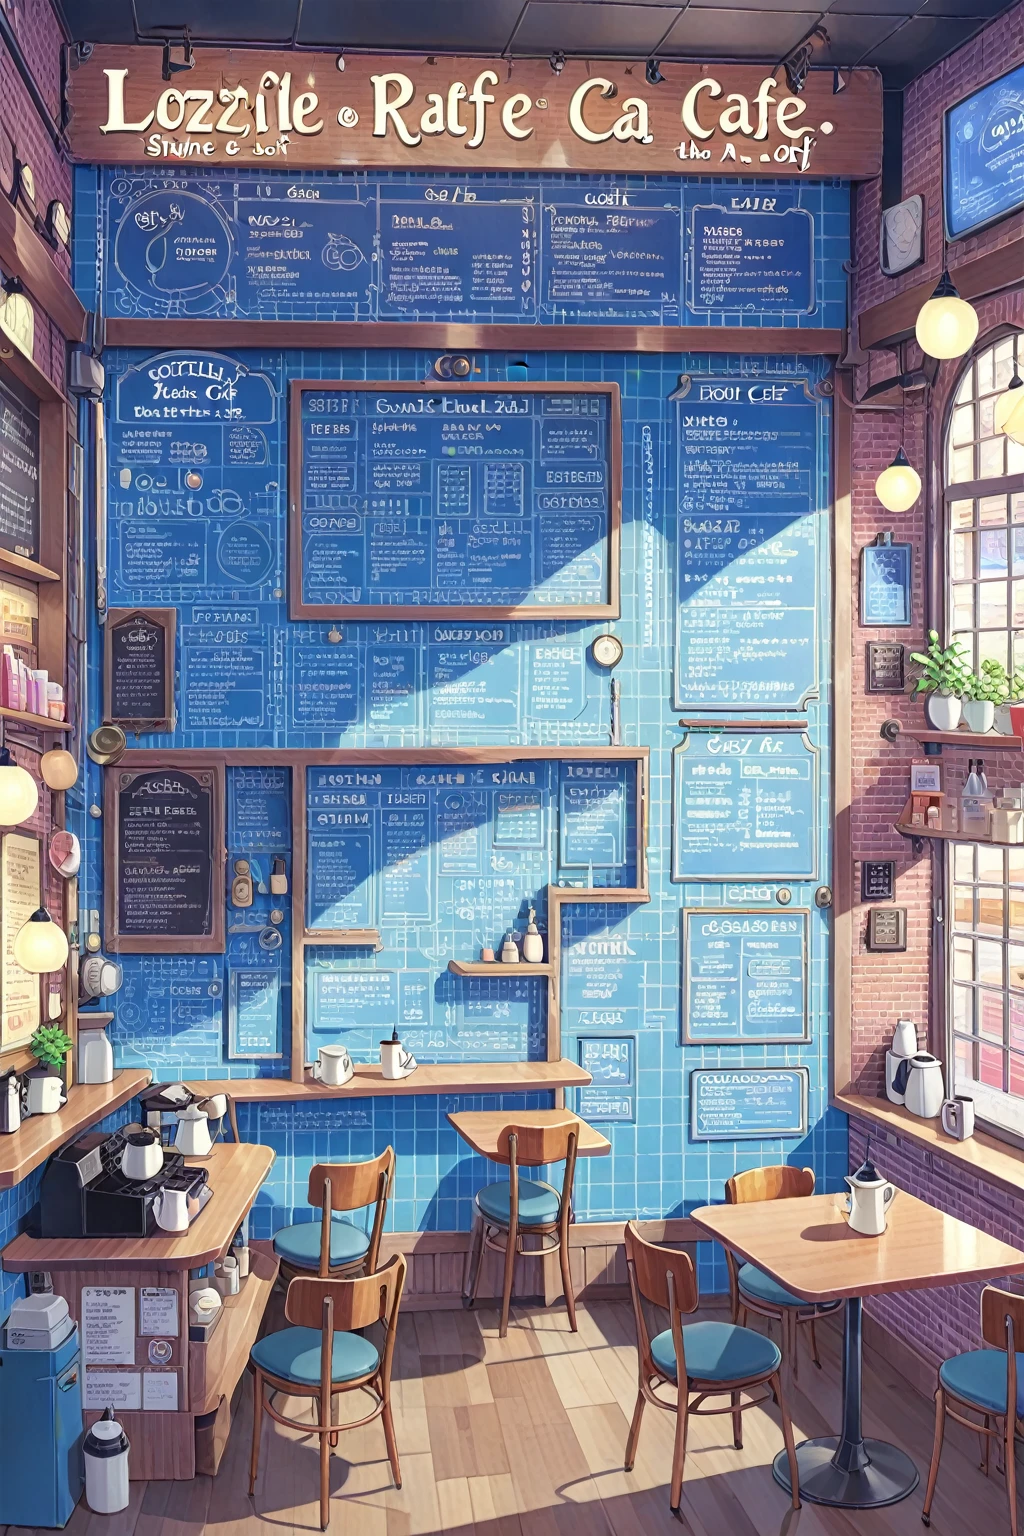 ON PARCHMENT,INK ILLUSTRATION,
((anime:1.4,illustration)),(masterpiece, top quality, best quality),(ultra-detailed, absolutely resolution),((16k, high res)), (((A detailed blueprint of the section of Lofi cafe, a fairytale-style cafe, detailed labeling text, grid lines,)) ((cozy lofi illustration:1.4)), ((anime:1.4, illustration)),(masterpiece, top quality, best quality),(ultra-detailed, absolutely resolution),((16k, high res)) BREAK {lofi art, style of Laurie Greasley, style of Makoto Shinkai, anime aesthetic},
